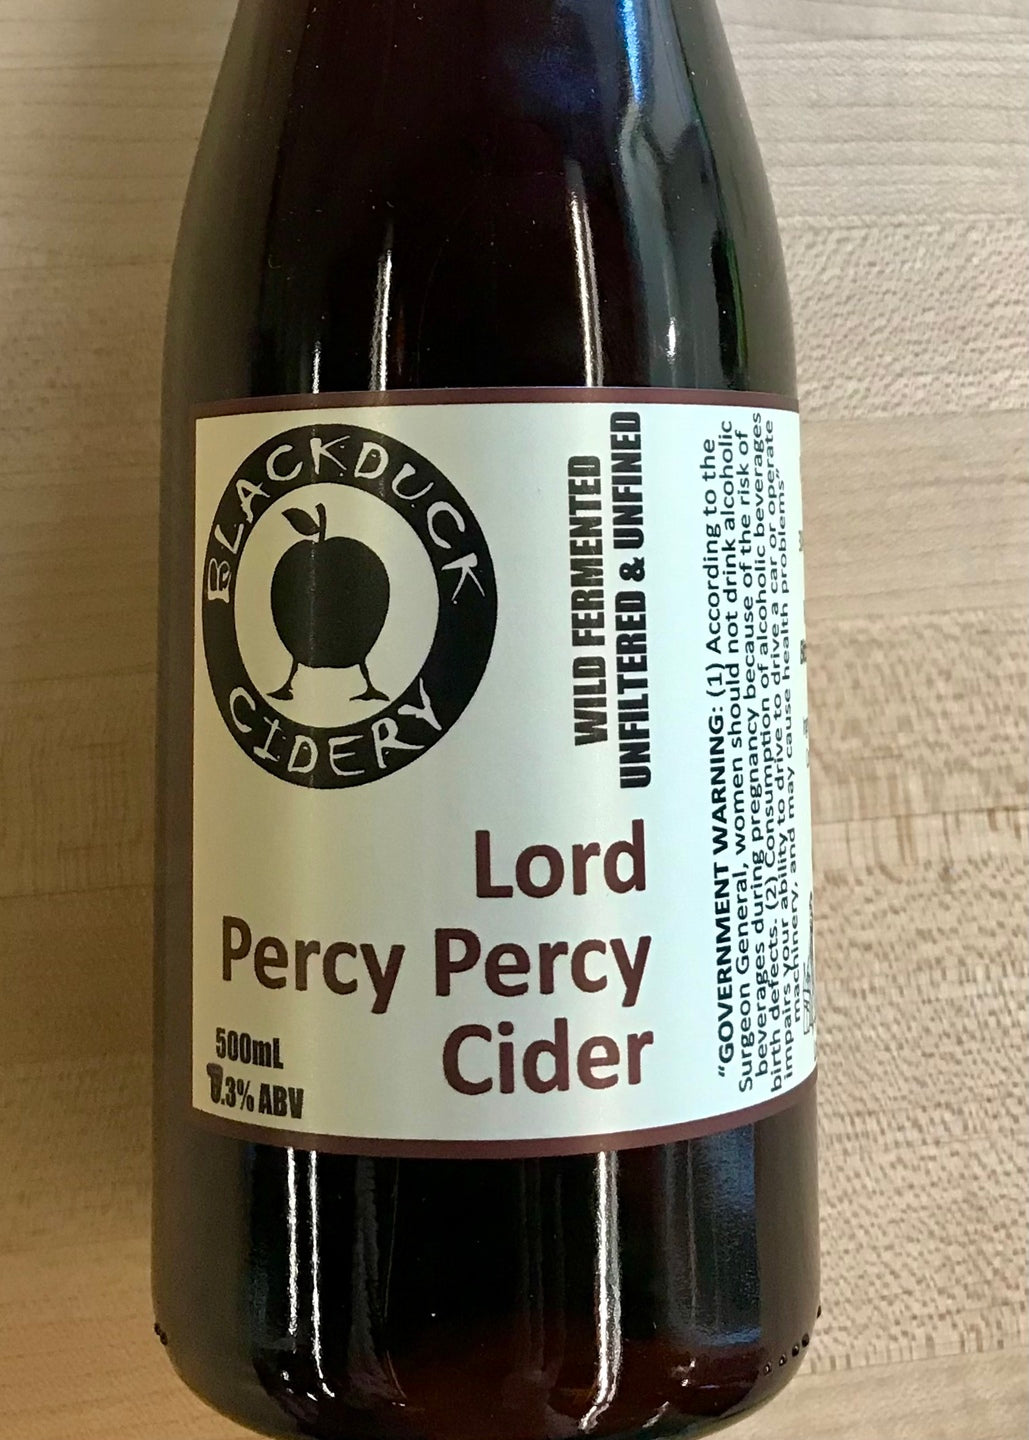 Blackduck Cidery, Lord Percy Percy, 2019 (500ml)